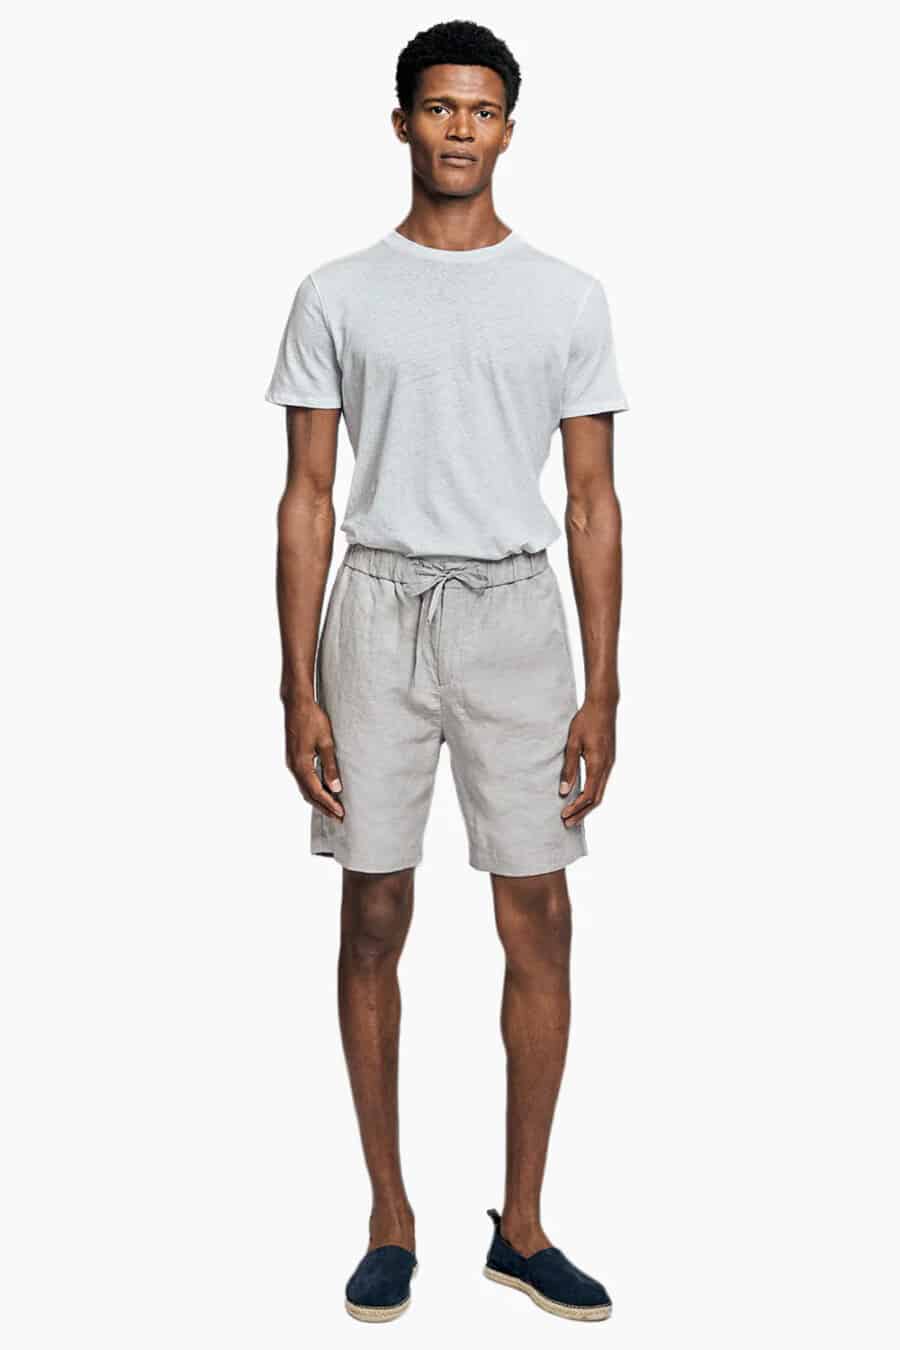 Men's light grey linen shorts with white T-shirt tucked in and navy espadrilles outfit